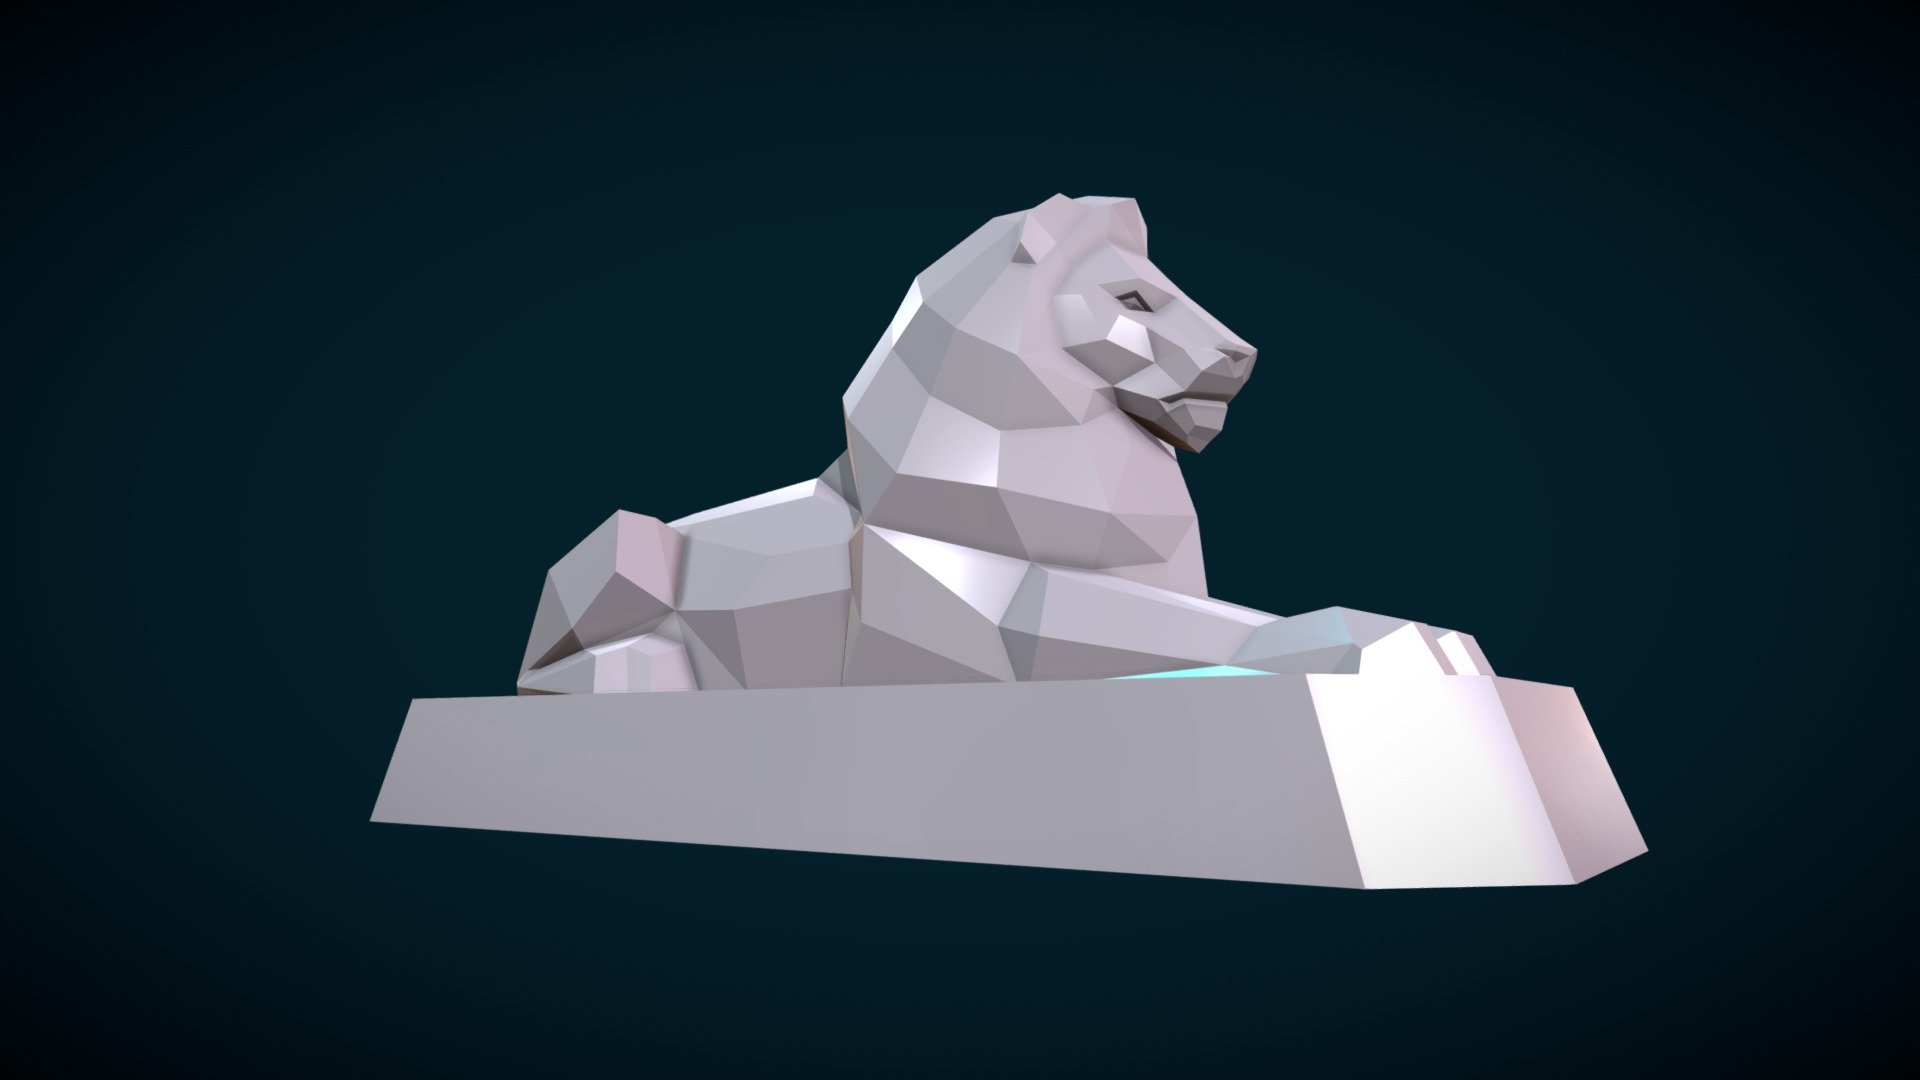 Print ready, low poly lion sculpture.

Measure units are millimeters, the figure is about 9.9 cm in length(without base).

For the hollow version there is about 1 mm for wall thickness.

Mesh is manifold, no holes, no inverted faces, no bad contiguous edges.

Available formats: .blend, .stl, .obj, .fbx, .dae

Here is two versions of the model:

1) LP_Lion_sld. (blend, .obj, .fbx, .dae. stl) This files contain solid version of the model. The model consists of 1006 triangular faces.

2) LP_Lion_empt. (blend, .obj, .fbx, .dae. stl) Here is hollow version of the model. The model consists of 42278 triangular faces.

For .stl the lion and the base are available as separate files - Lion Sculpture LP - Buy Royalty Free 3D model by Skazok 3d model